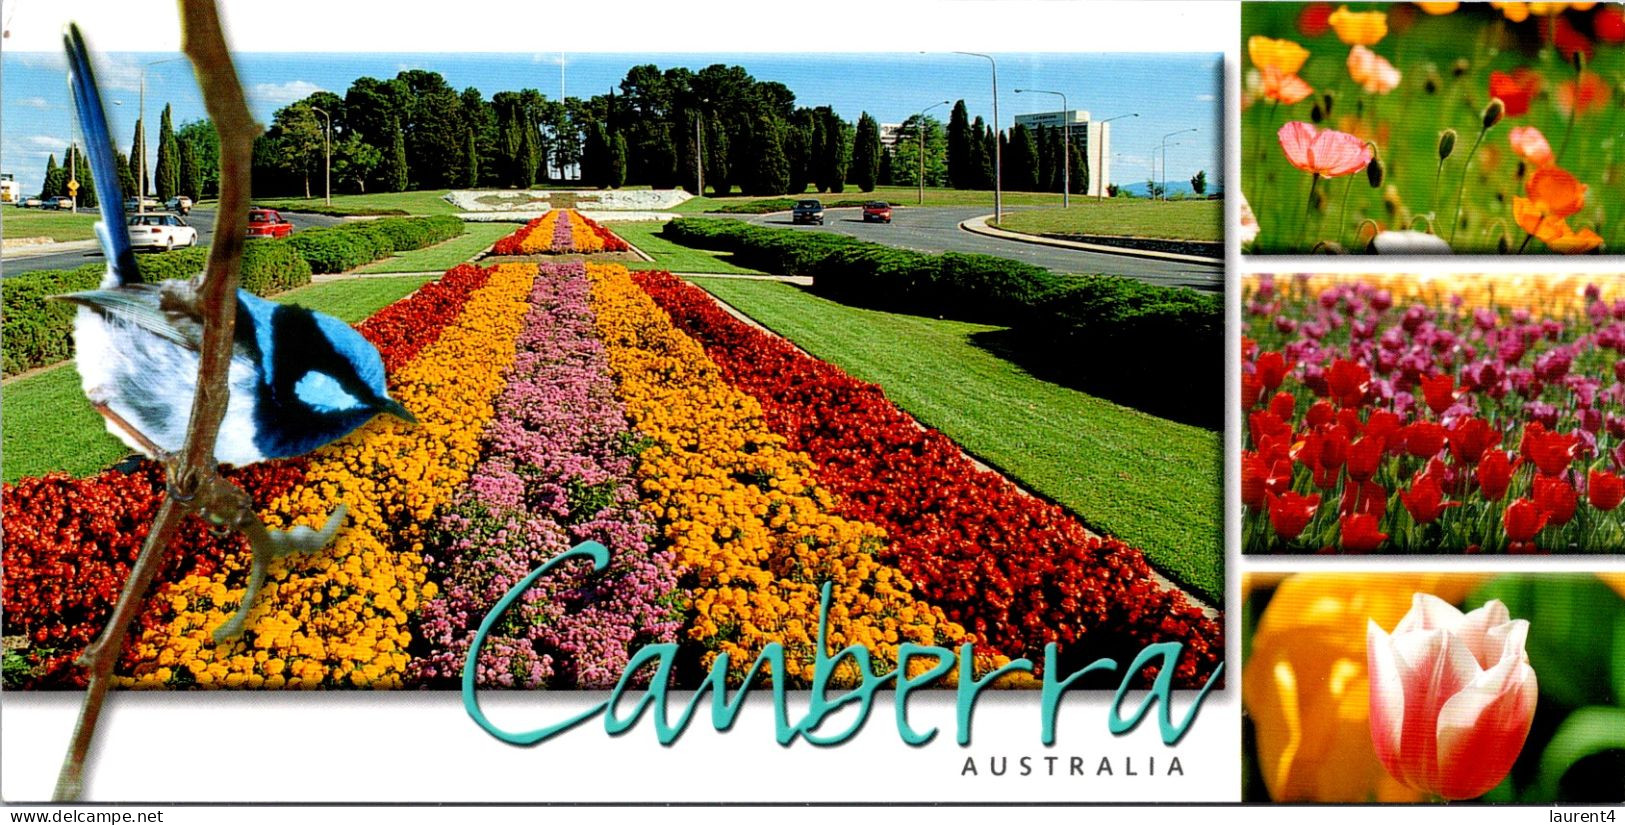 19-7-2023 (2 S 39) Australia - ACT - Canberra (flowers & Bird) - Canberra (ACT)